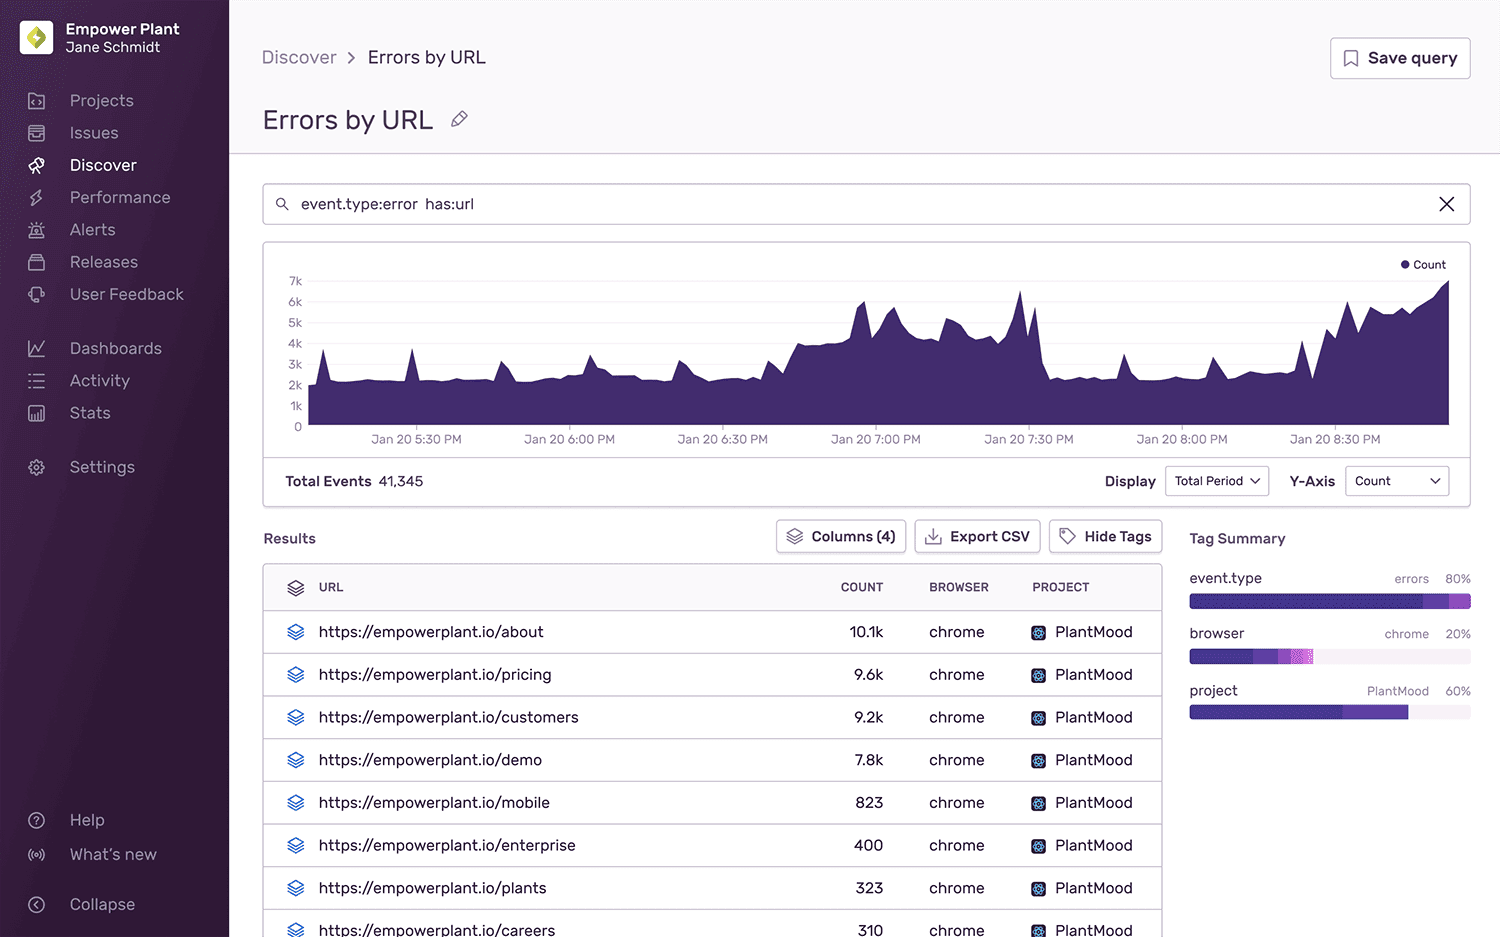 Page displaying a graph of error spikes by URL, the event tag summary, and results of the query.